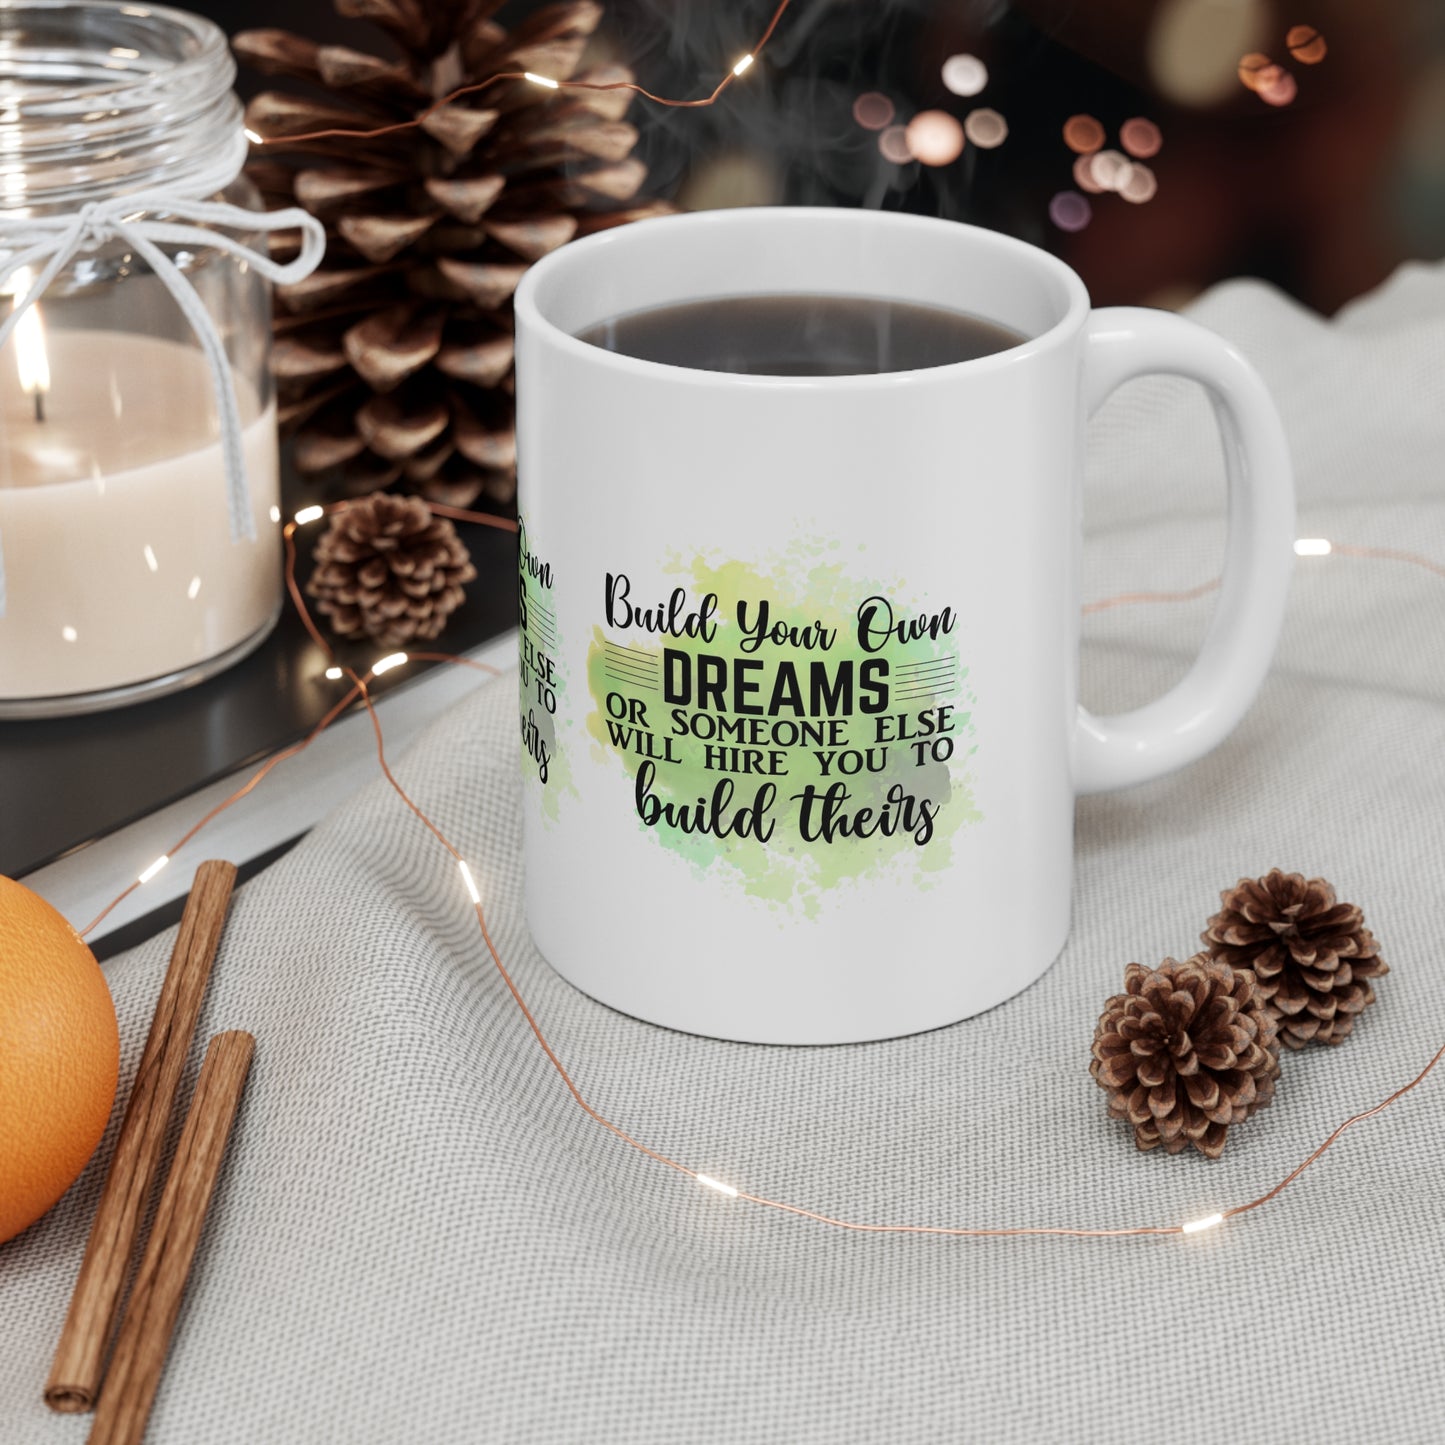 "BUILD YOUR OWN DREAMS or Someone else will Hire you to Build theirs" Inspirational Mug - MUGSCITY - Free Shipping